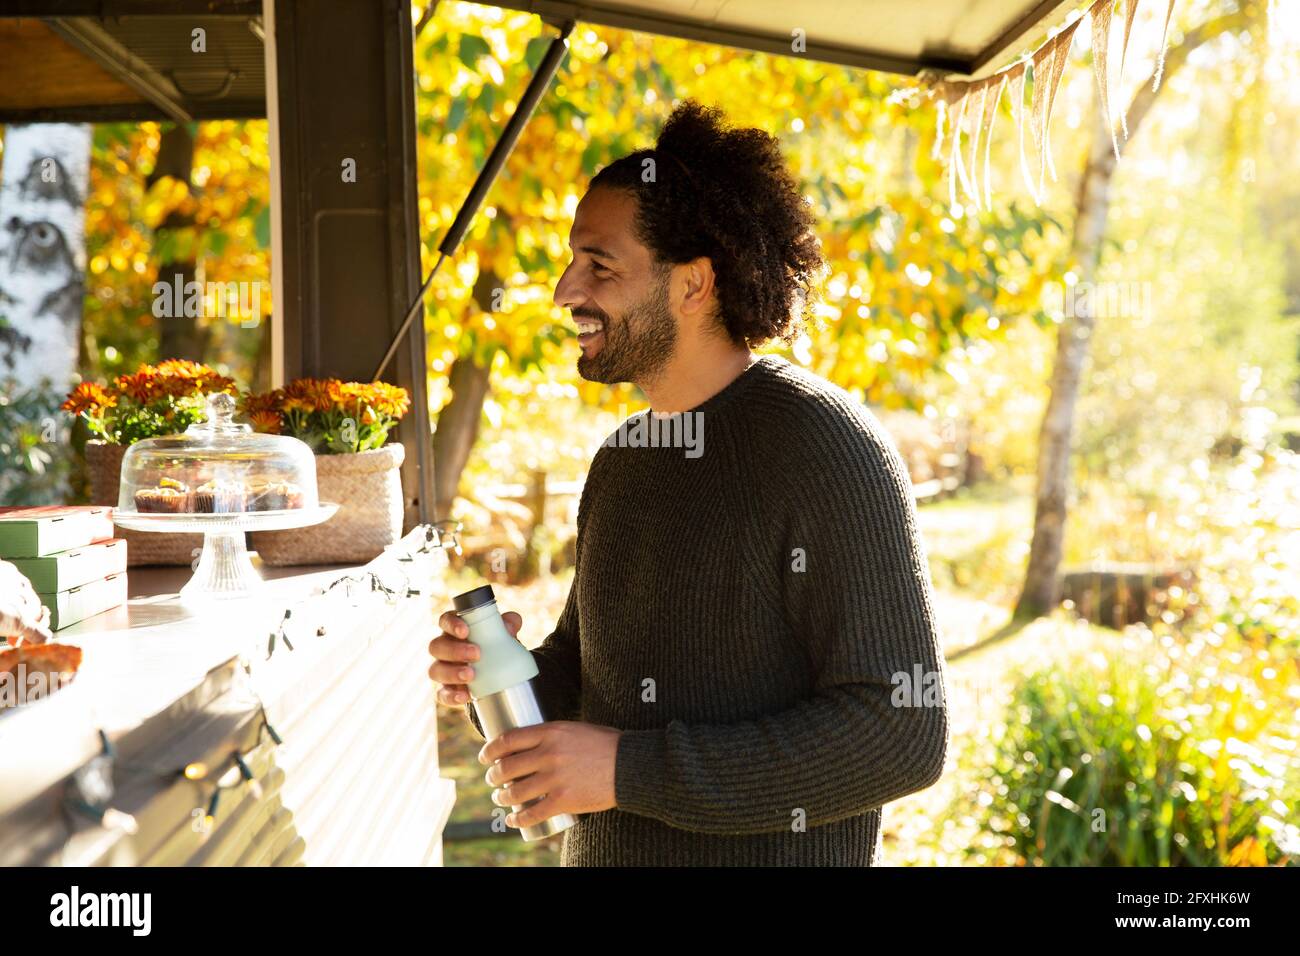 Smiling male customer ordering from food truck in autumn park Stock Photo